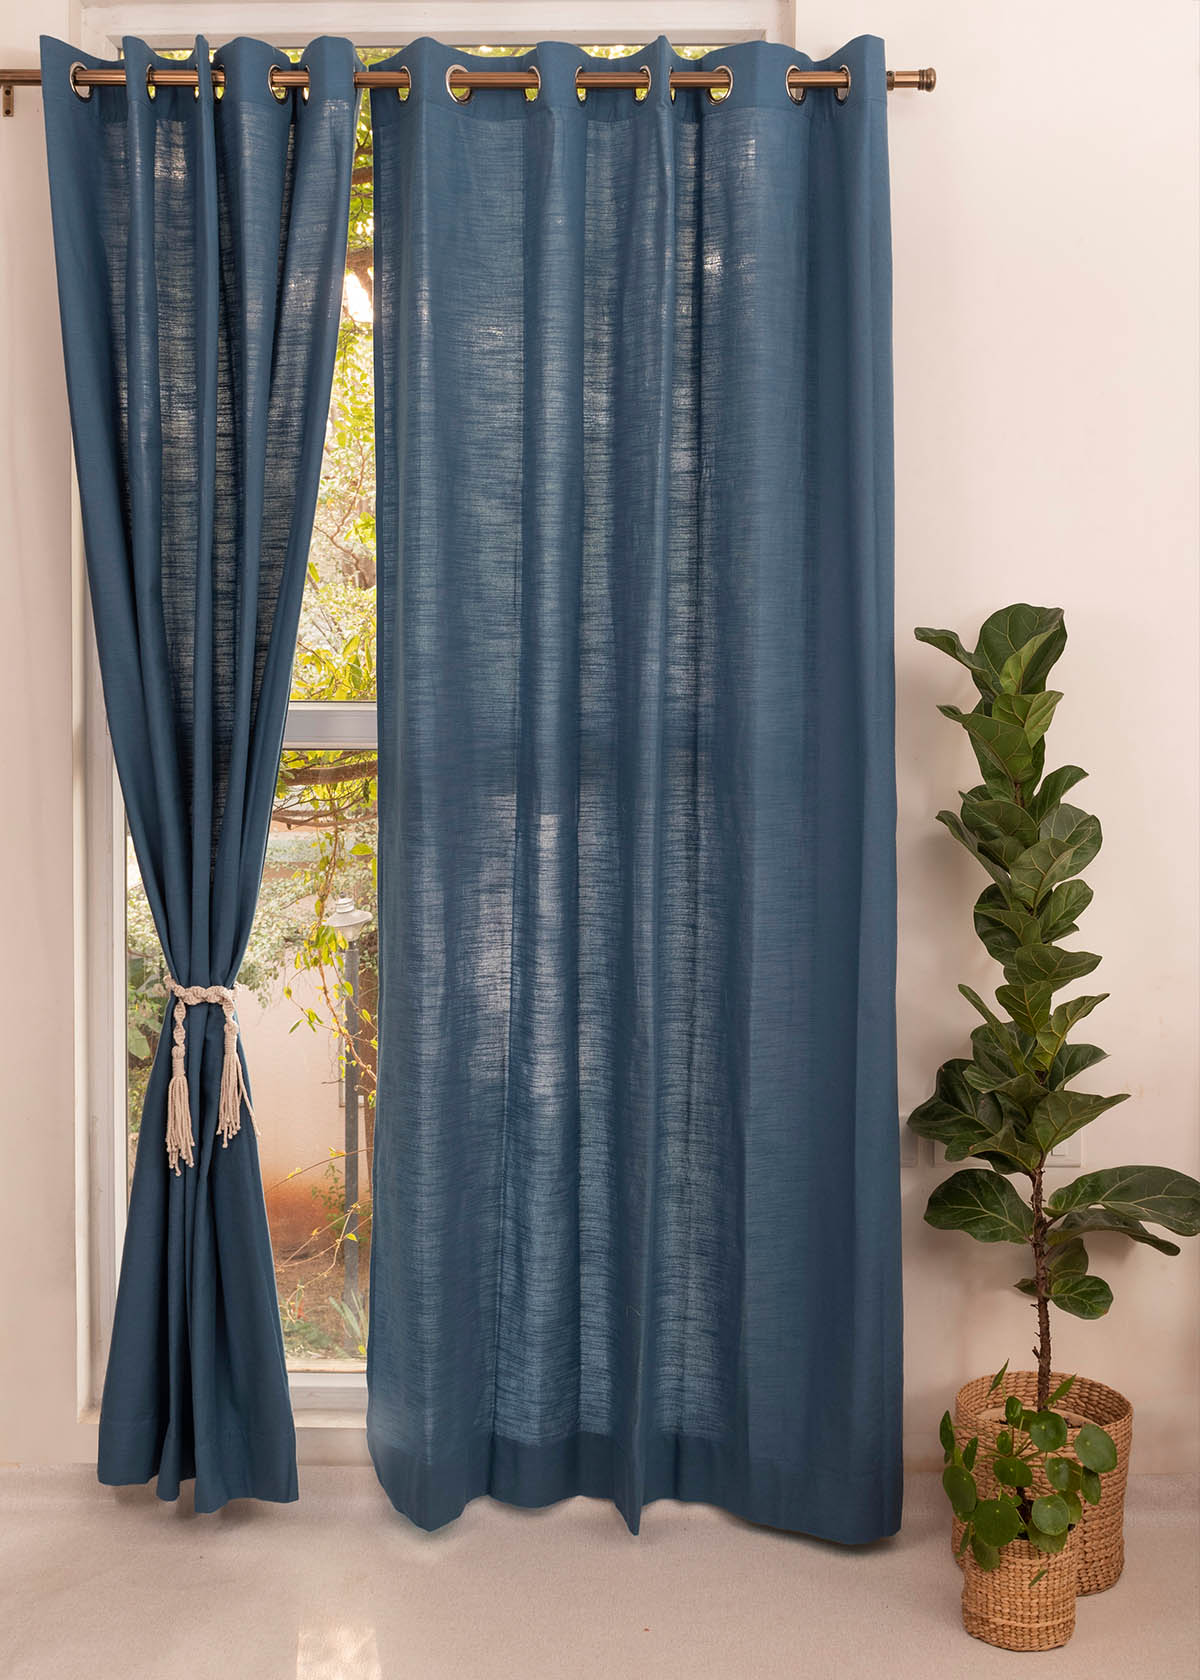 Solid  Royal blue 100% cotton plain curtain for bedroom - Room darkening - Pack of 1